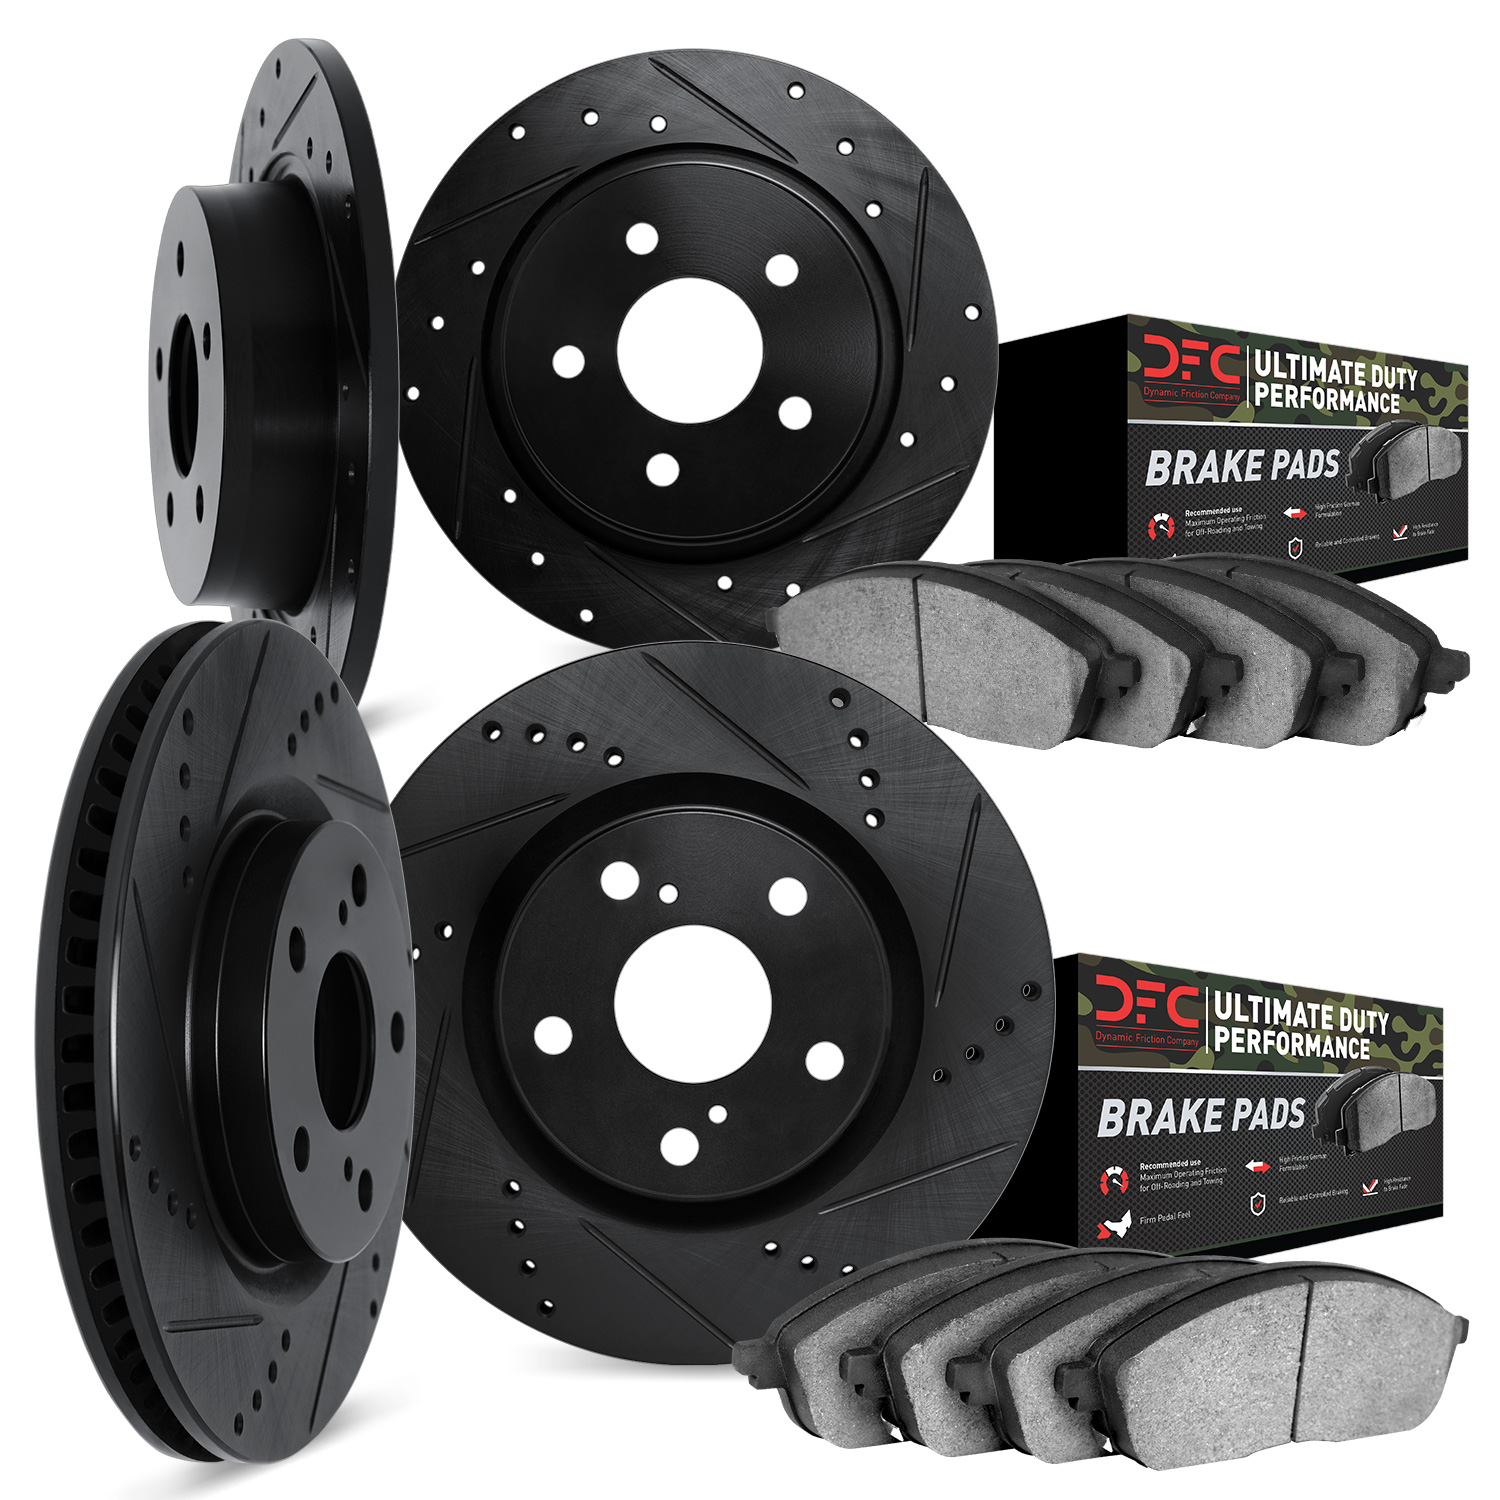 8404-54030 Drilled/Slotted Brake Rotors with Ultimate-Duty Brake Pads Kit [Black], 2002-2005 Ford/Lincoln/Mercury/Mazda, Positio